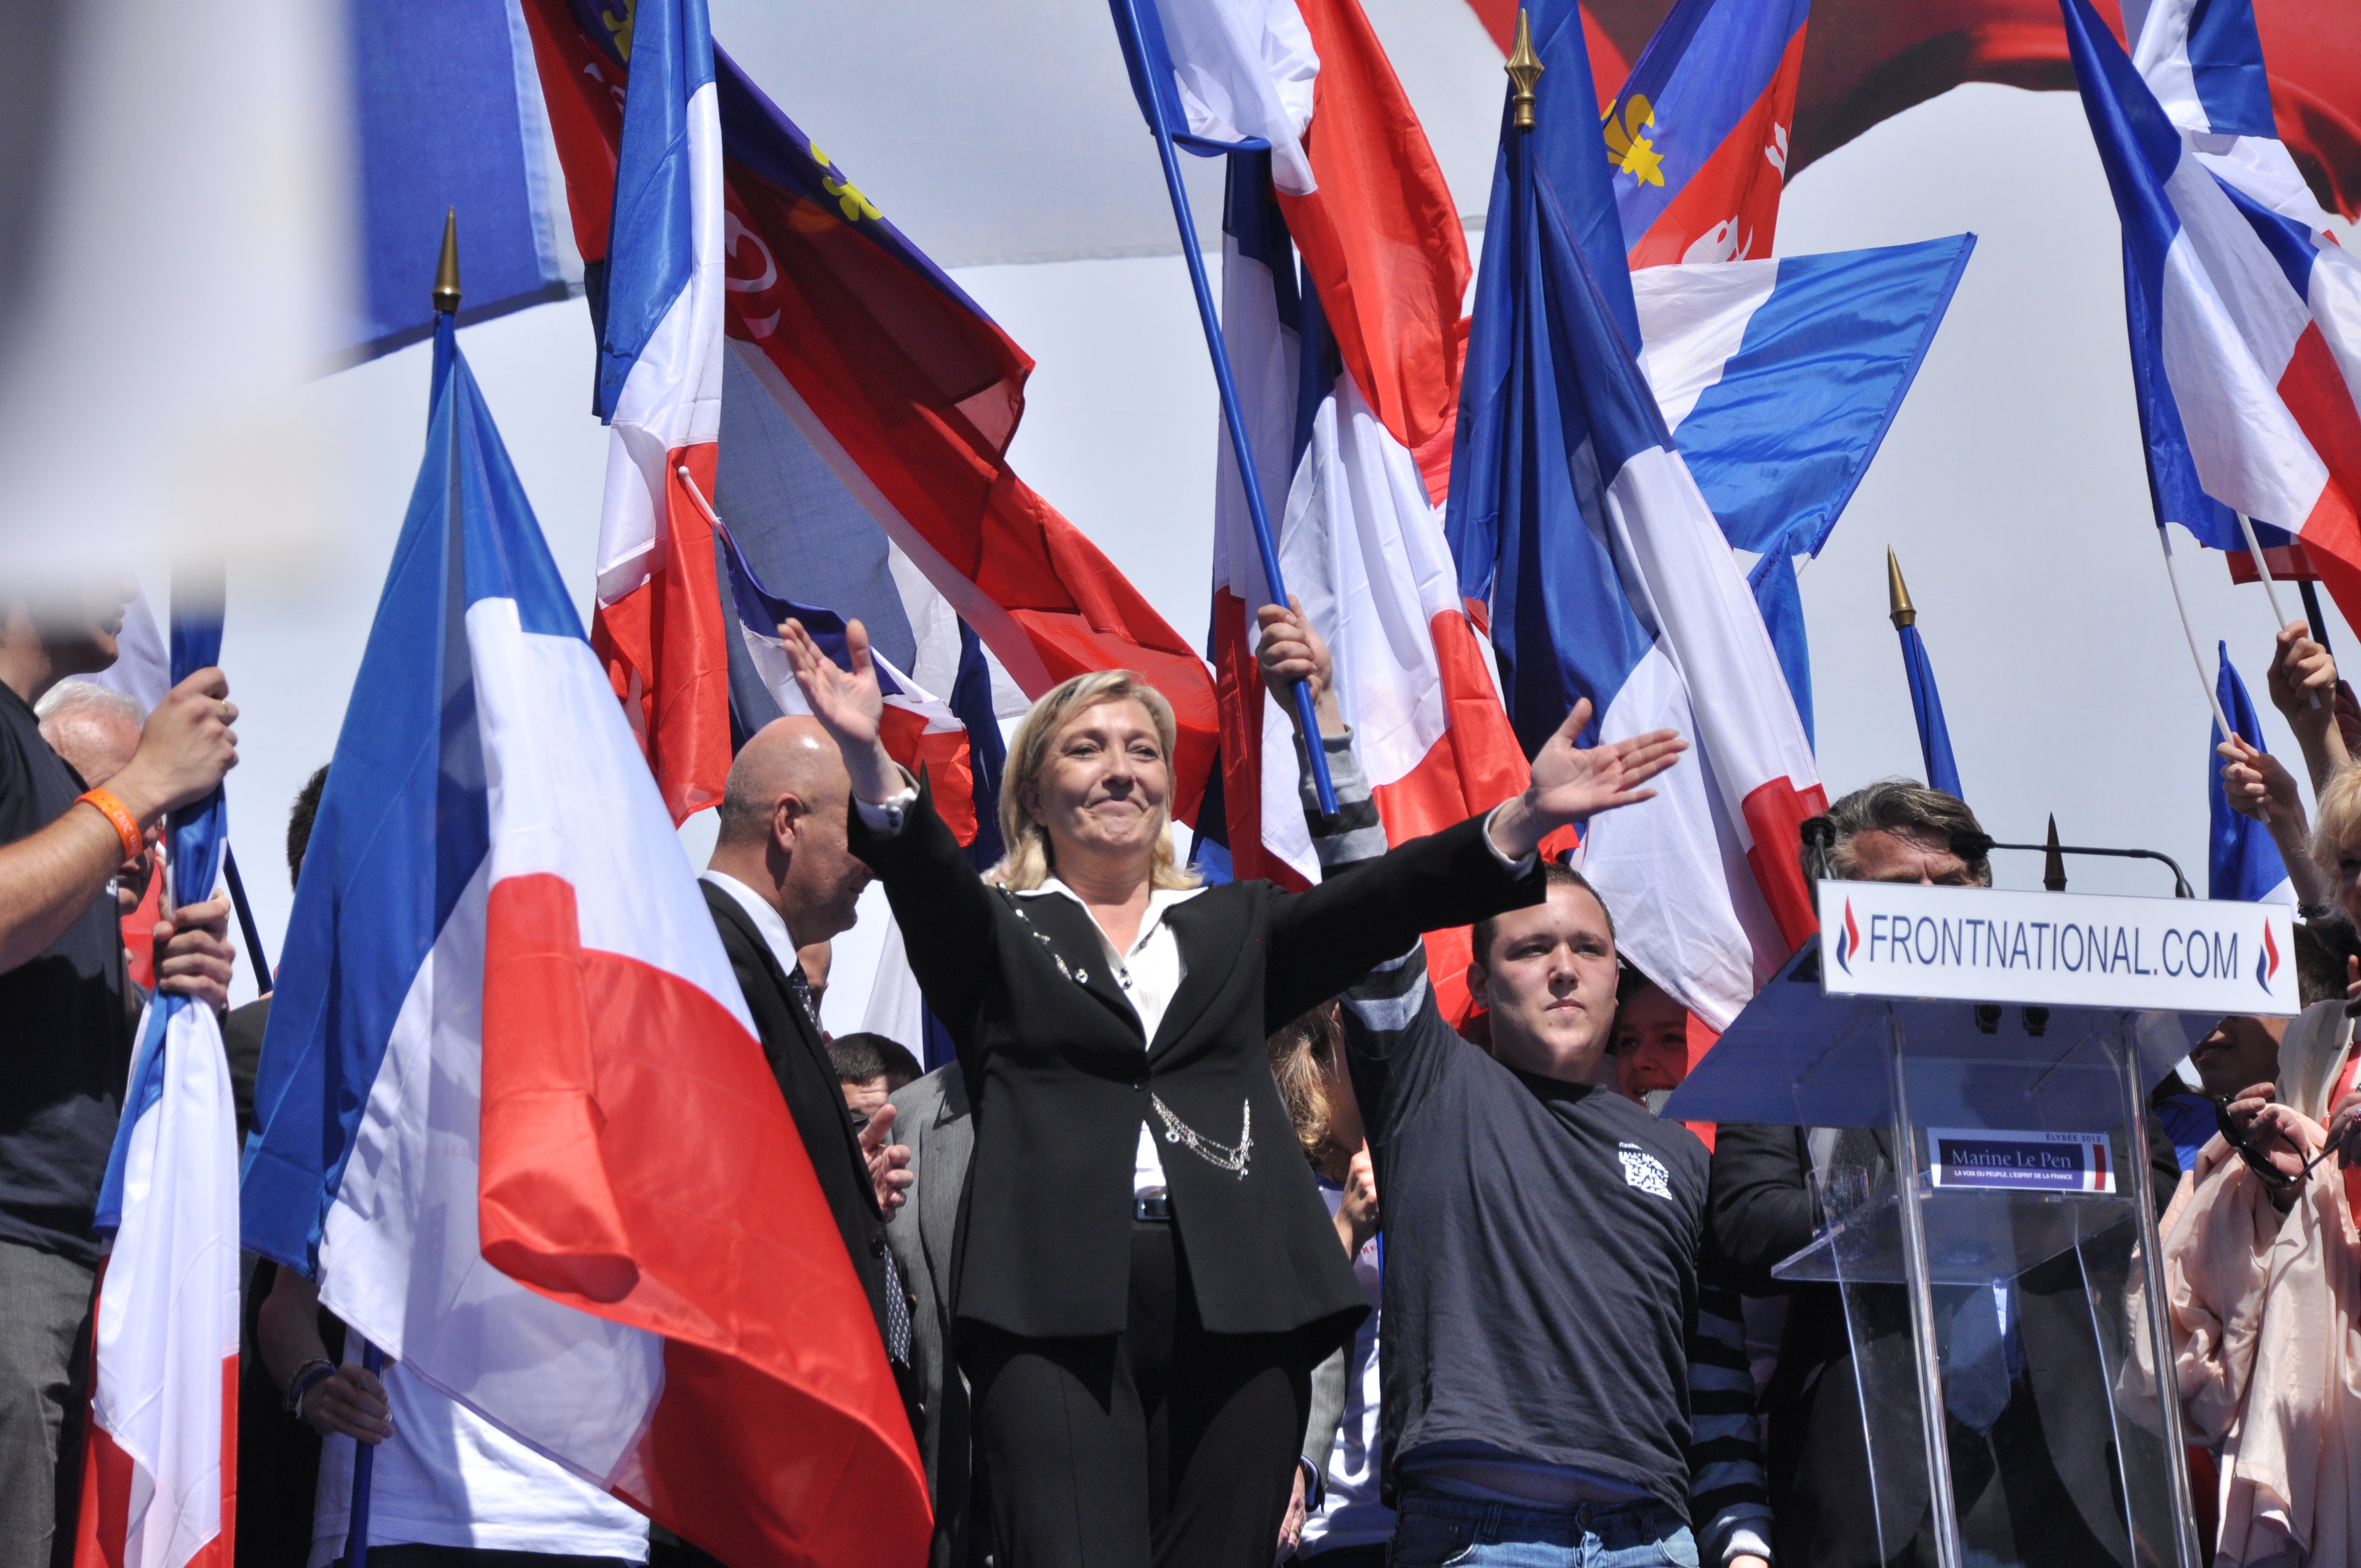 POLL: Does Marine Le Pen’s Electoral Success Thus Far Make You Worried For French Muslims?